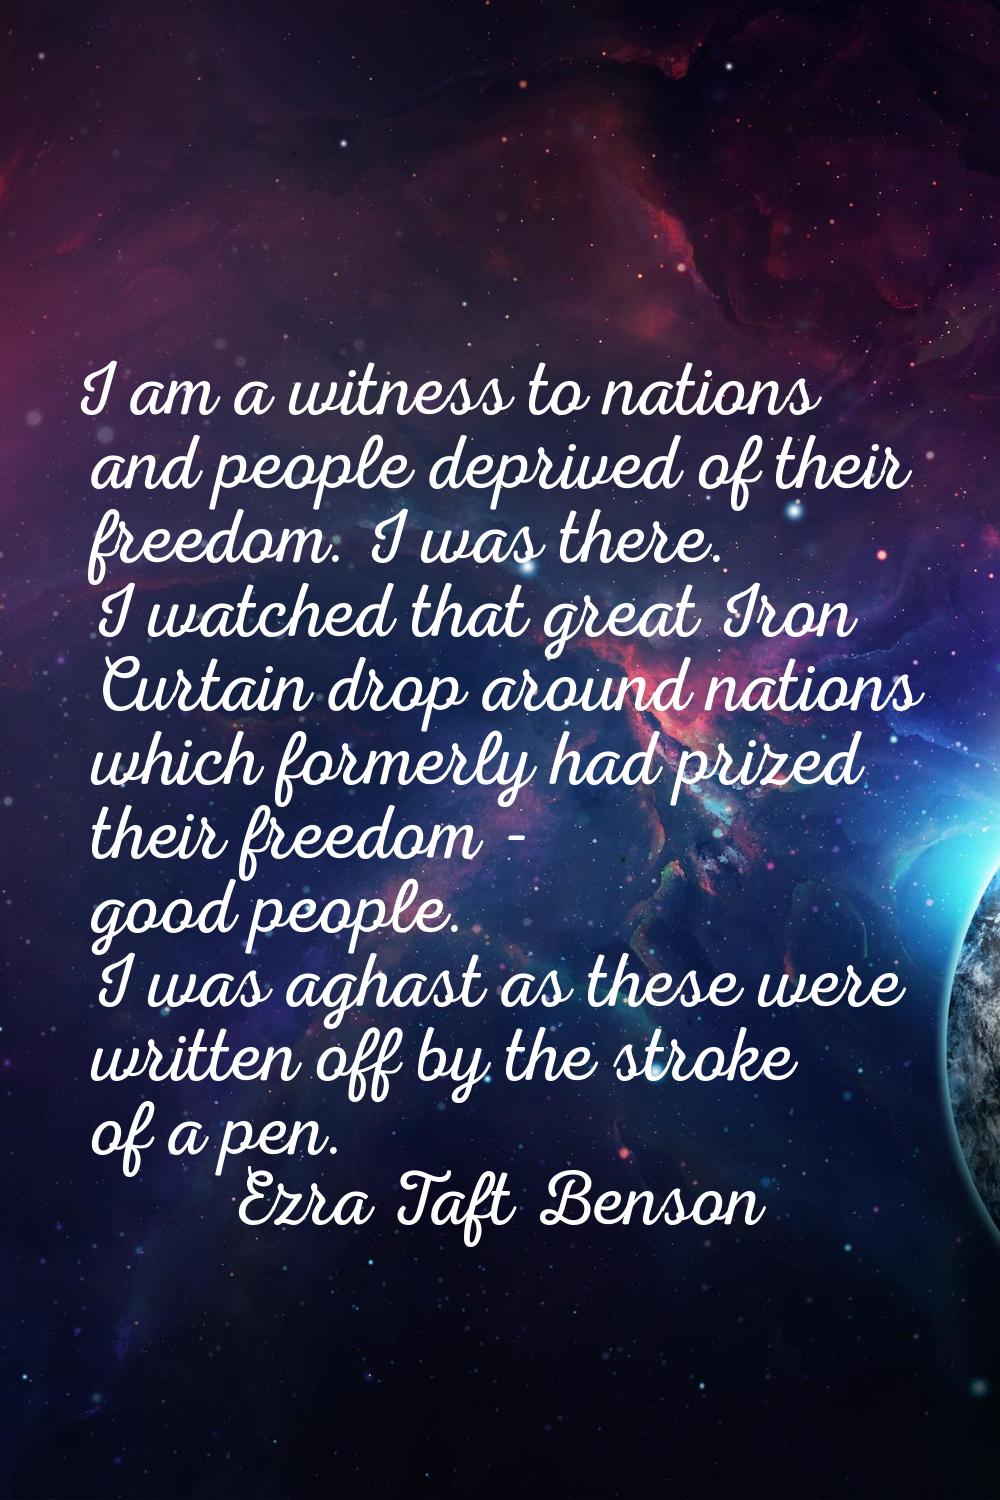 I am a witness to nations and people deprived of their freedom. I was there. I watched that great I